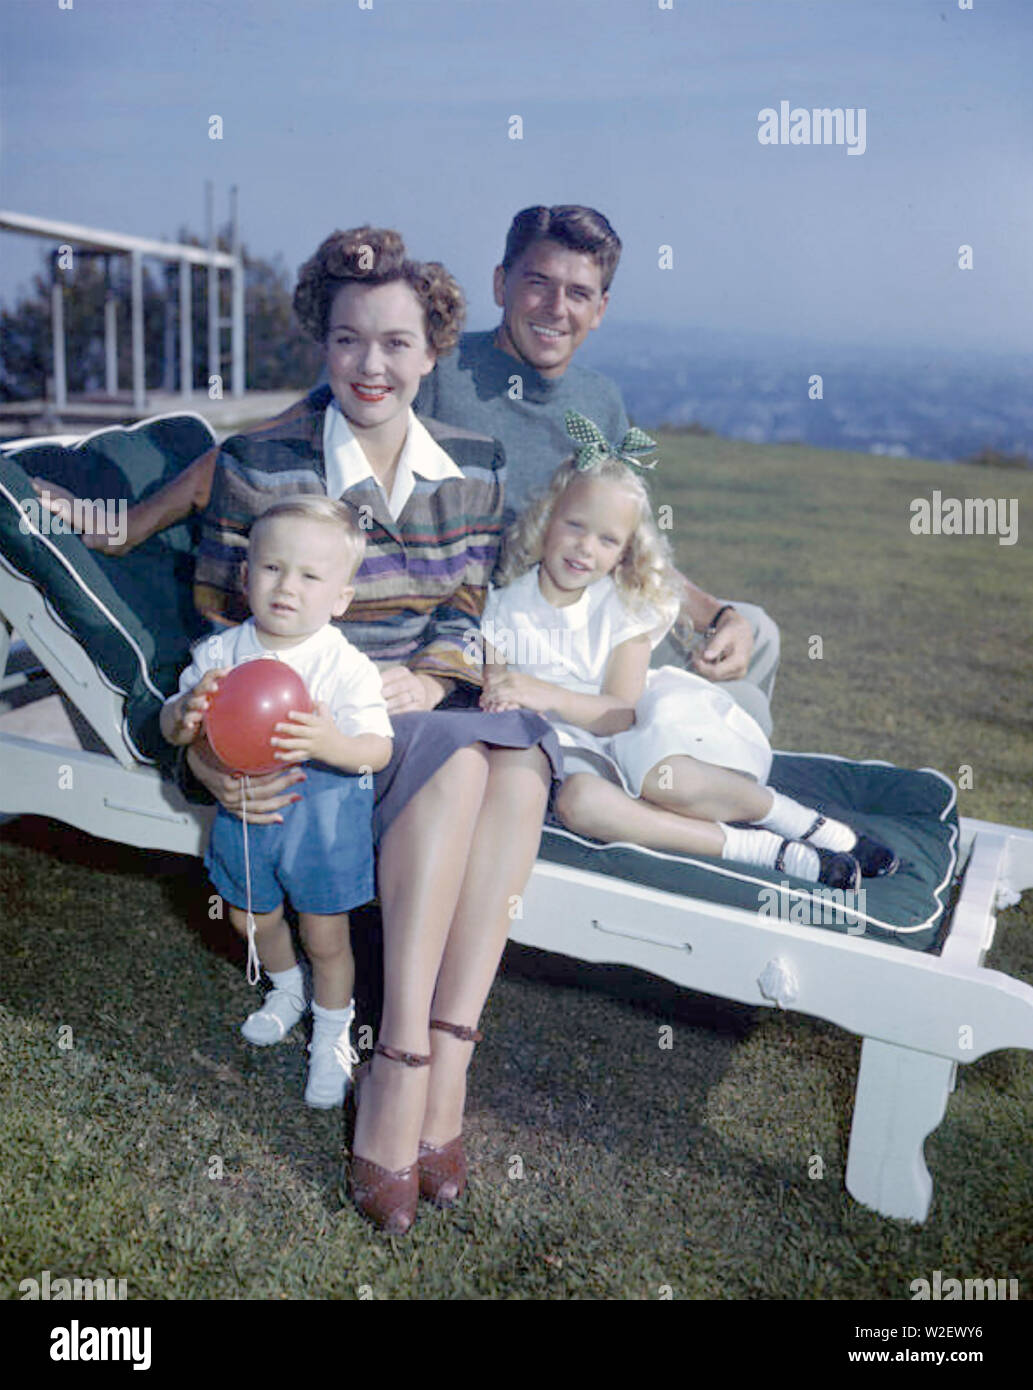 RONALD REAGAN (1911-2004) American film actor and later President with his first wife Jane Wyman and their children Maureen and Michael about 1946 Stock Photo